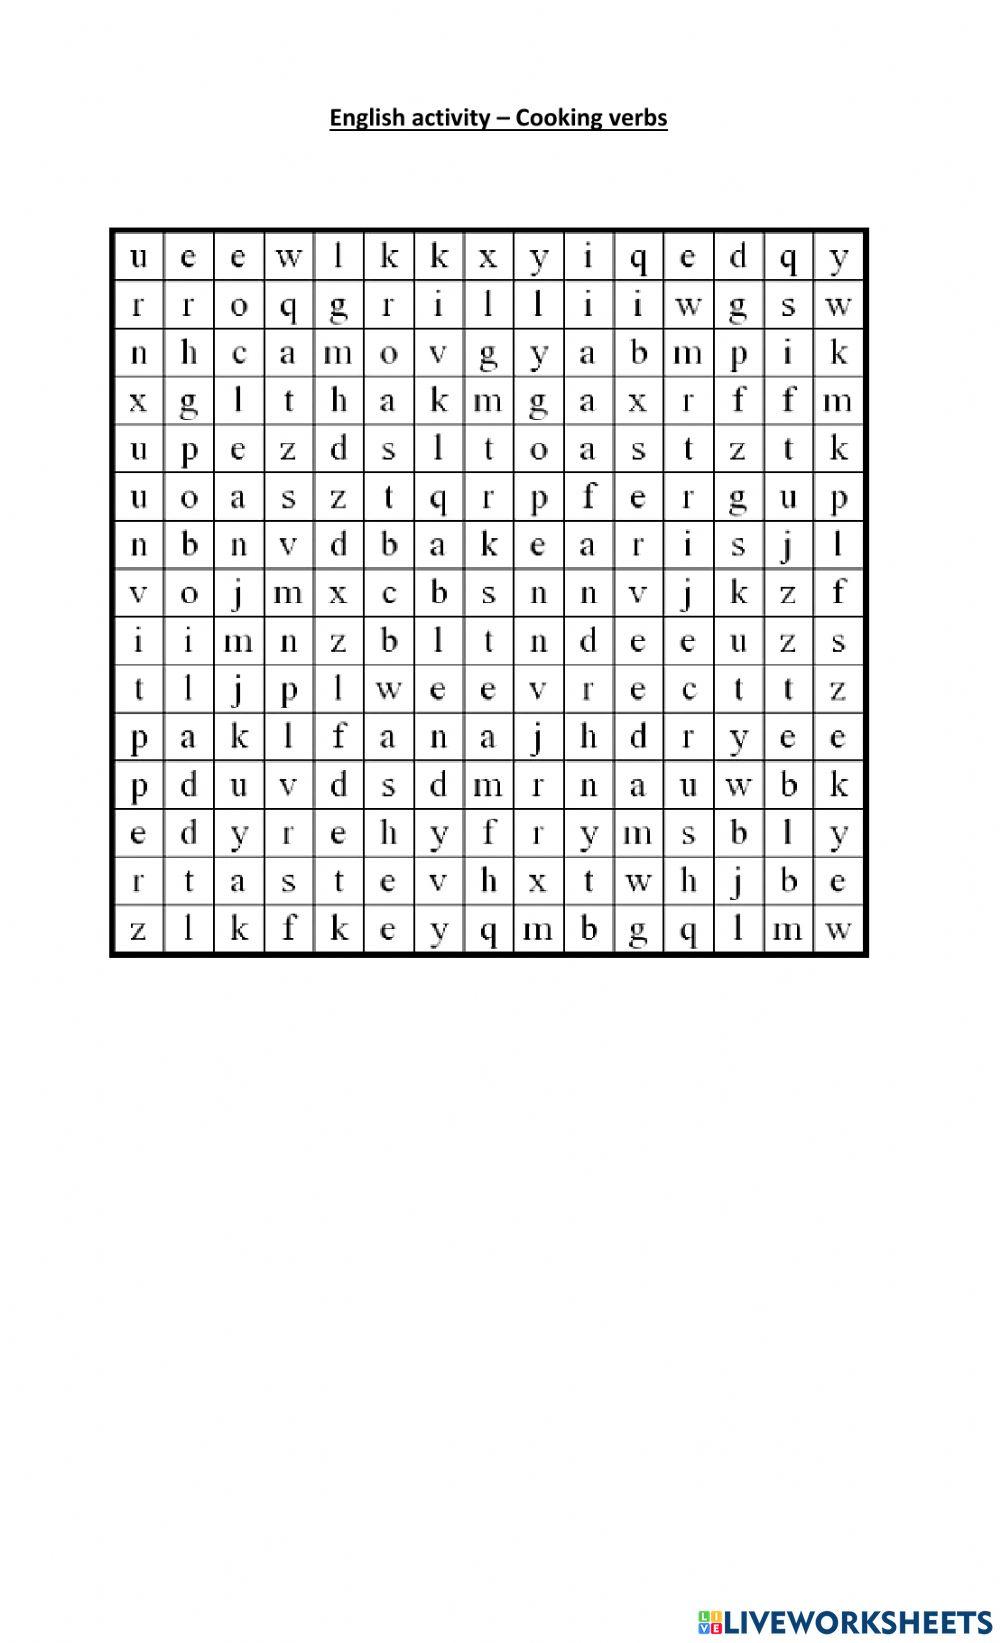 Wordsearch - Cooking verbs